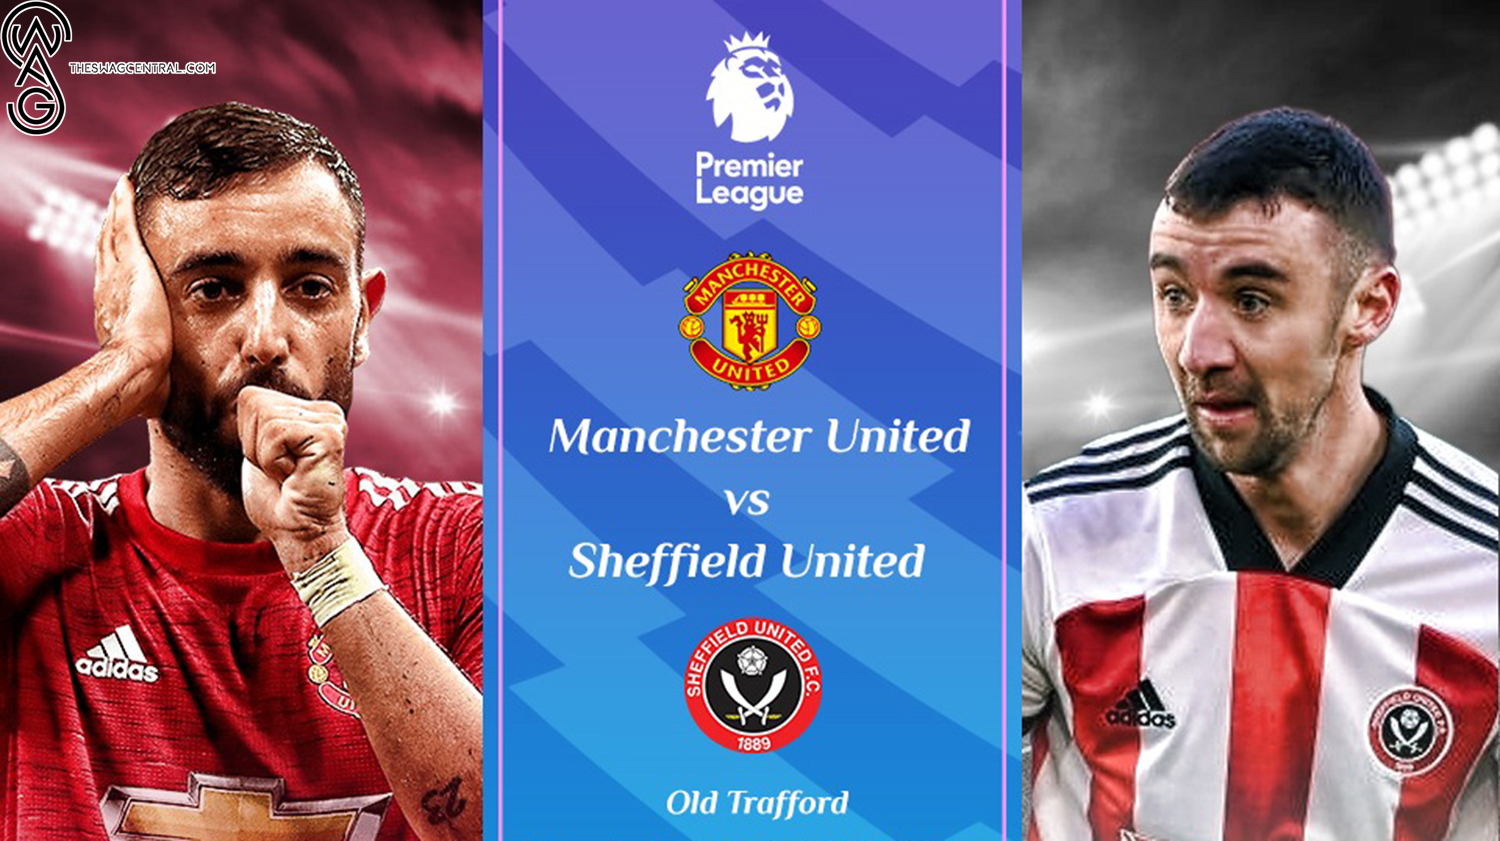 Premier League Showdown Manchester United Clash with Sheffield United at Old Trafford